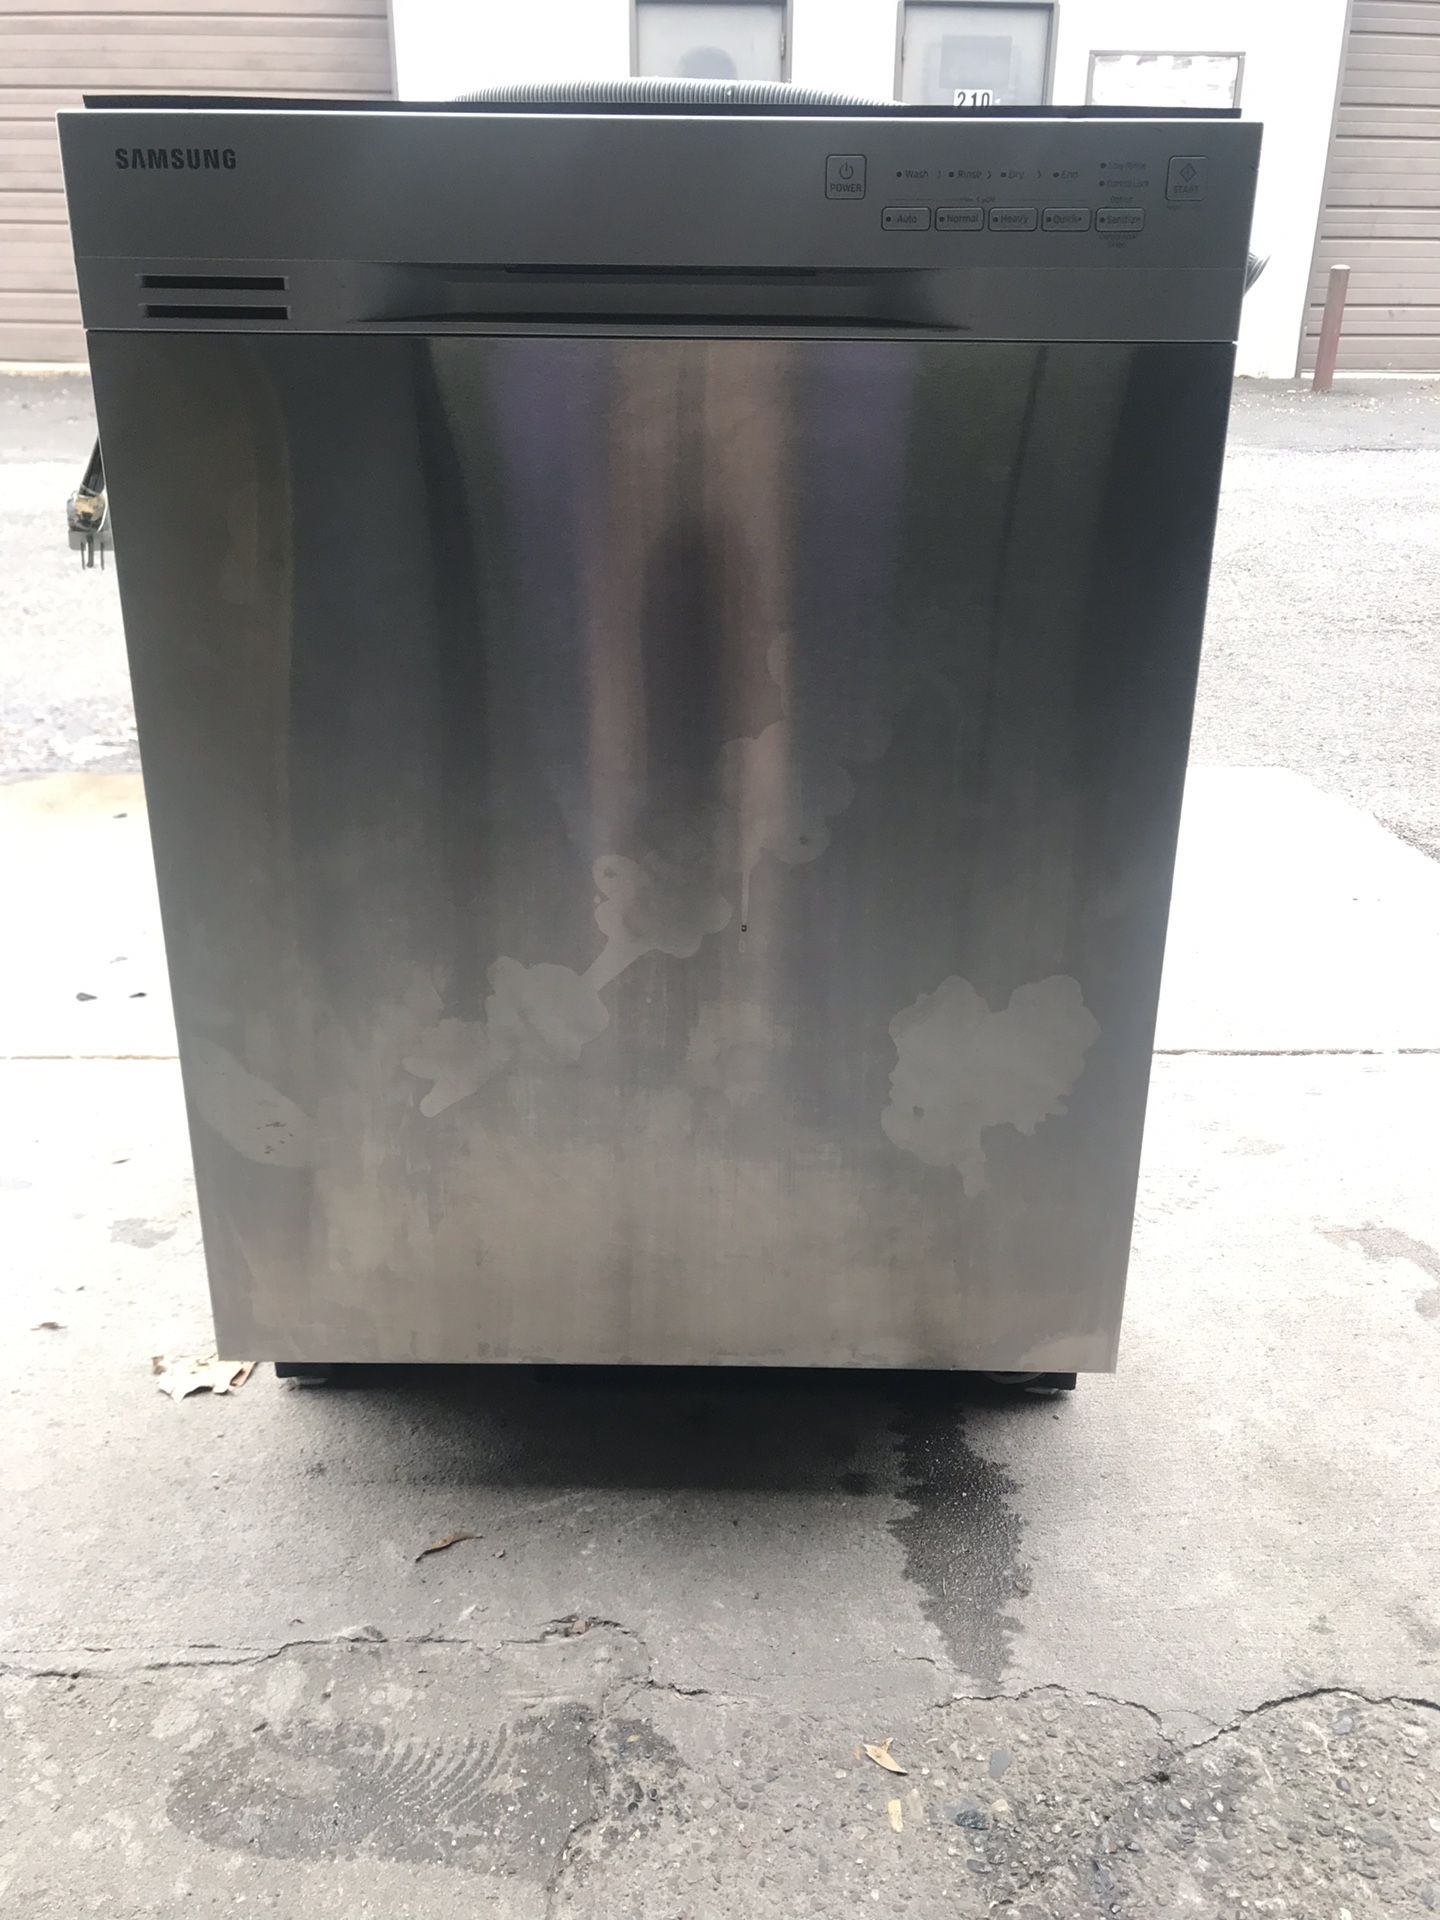 SAMSUNG NEW OPEN BOX NEW STAINLESS STEEL DISHWASHER